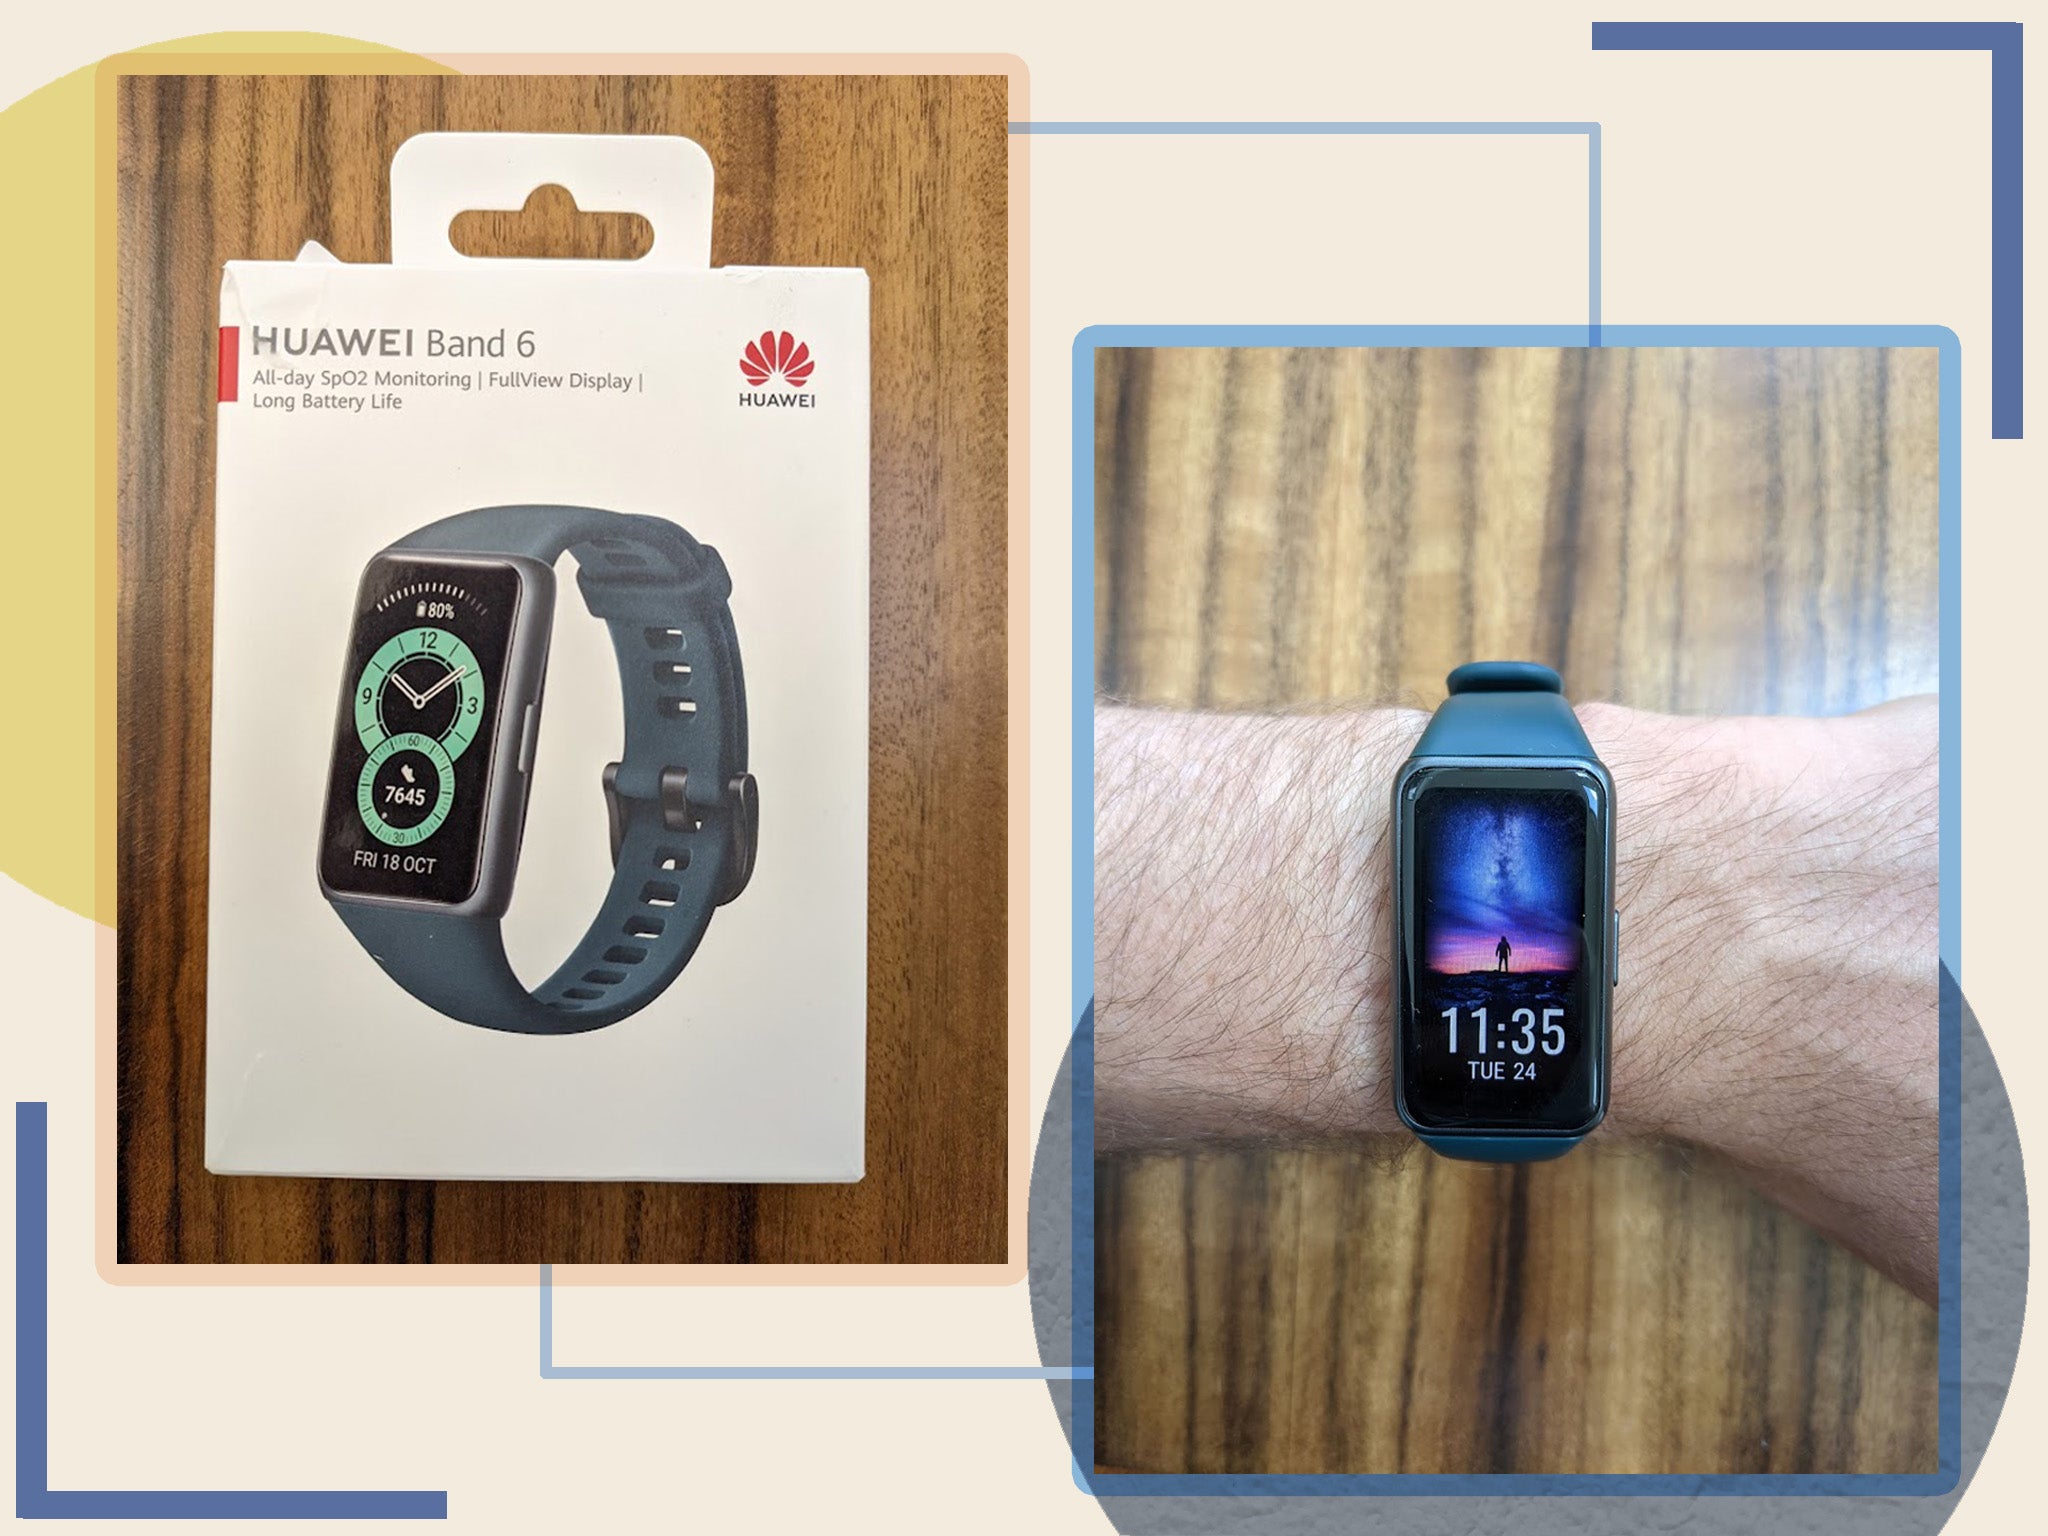 Huawei band 6 pro review: The budget fitness tracker with